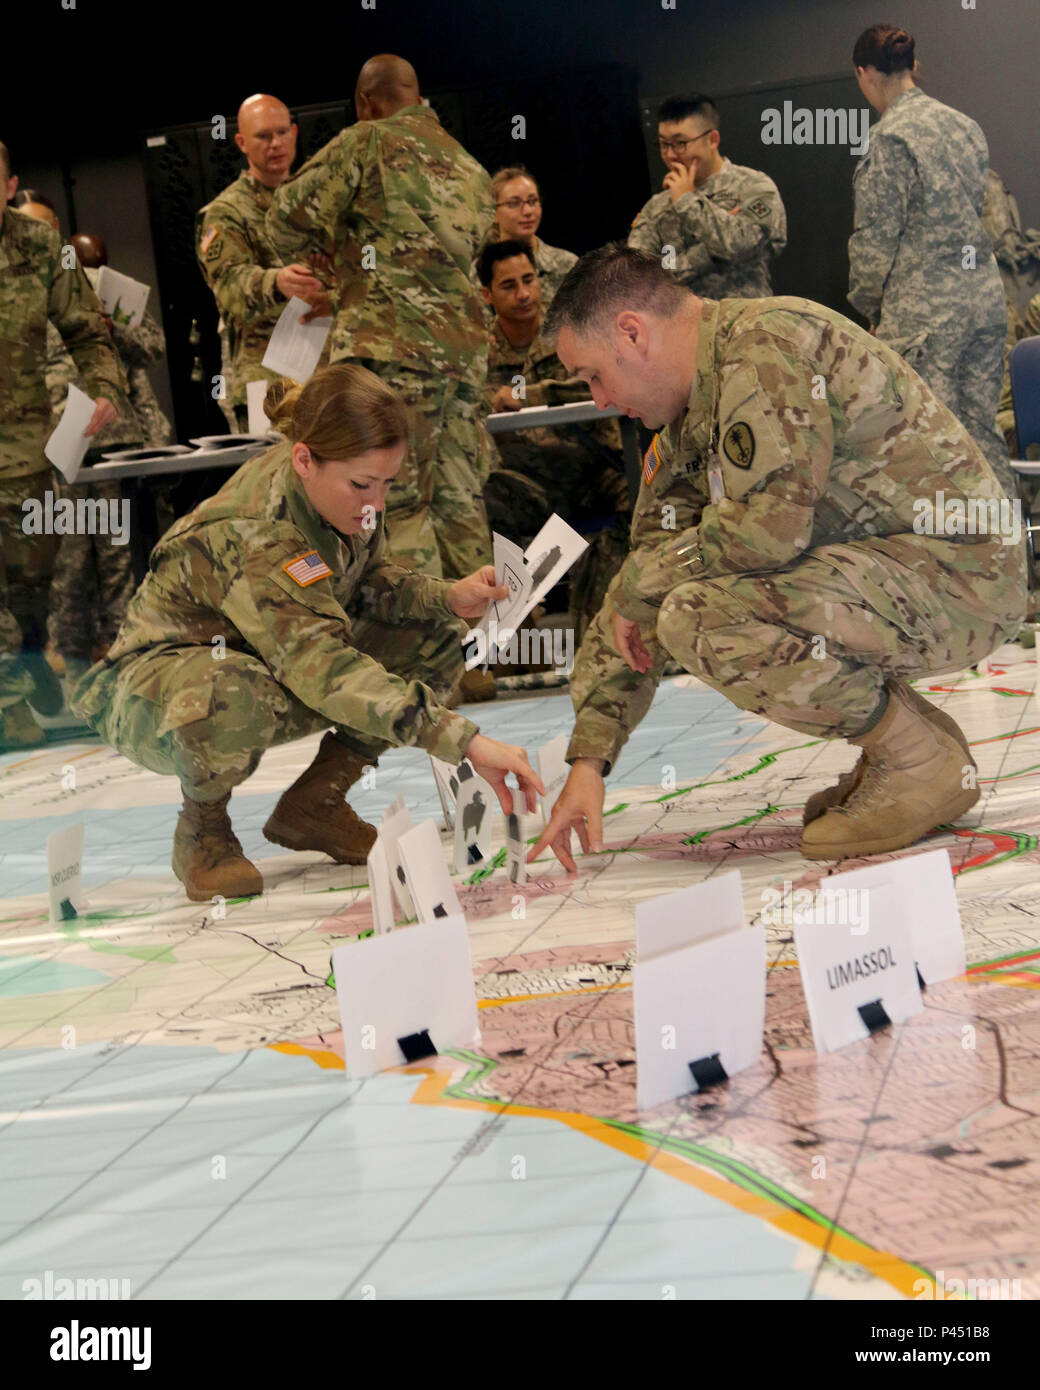 1st Lt. Neriann Velez-Rosado (left), supply officer, 391st Engineer Battalion, and Cpt. Michael Franzen, operations officer, 530th Military Police Battalion, discuss placement of their organizations operational equipment on a simulated training map during exercise Imua Dawn16 rehearsal of concept drill, Sagamihara Depot, Japan, June 14, 2016.  Exercises such as Imua Dawn16 are fundamental training opportunities for military forces in foreign humanitarian assistance to rapidly respond to help mitigate human suffering and greater property damage. Stock Photo